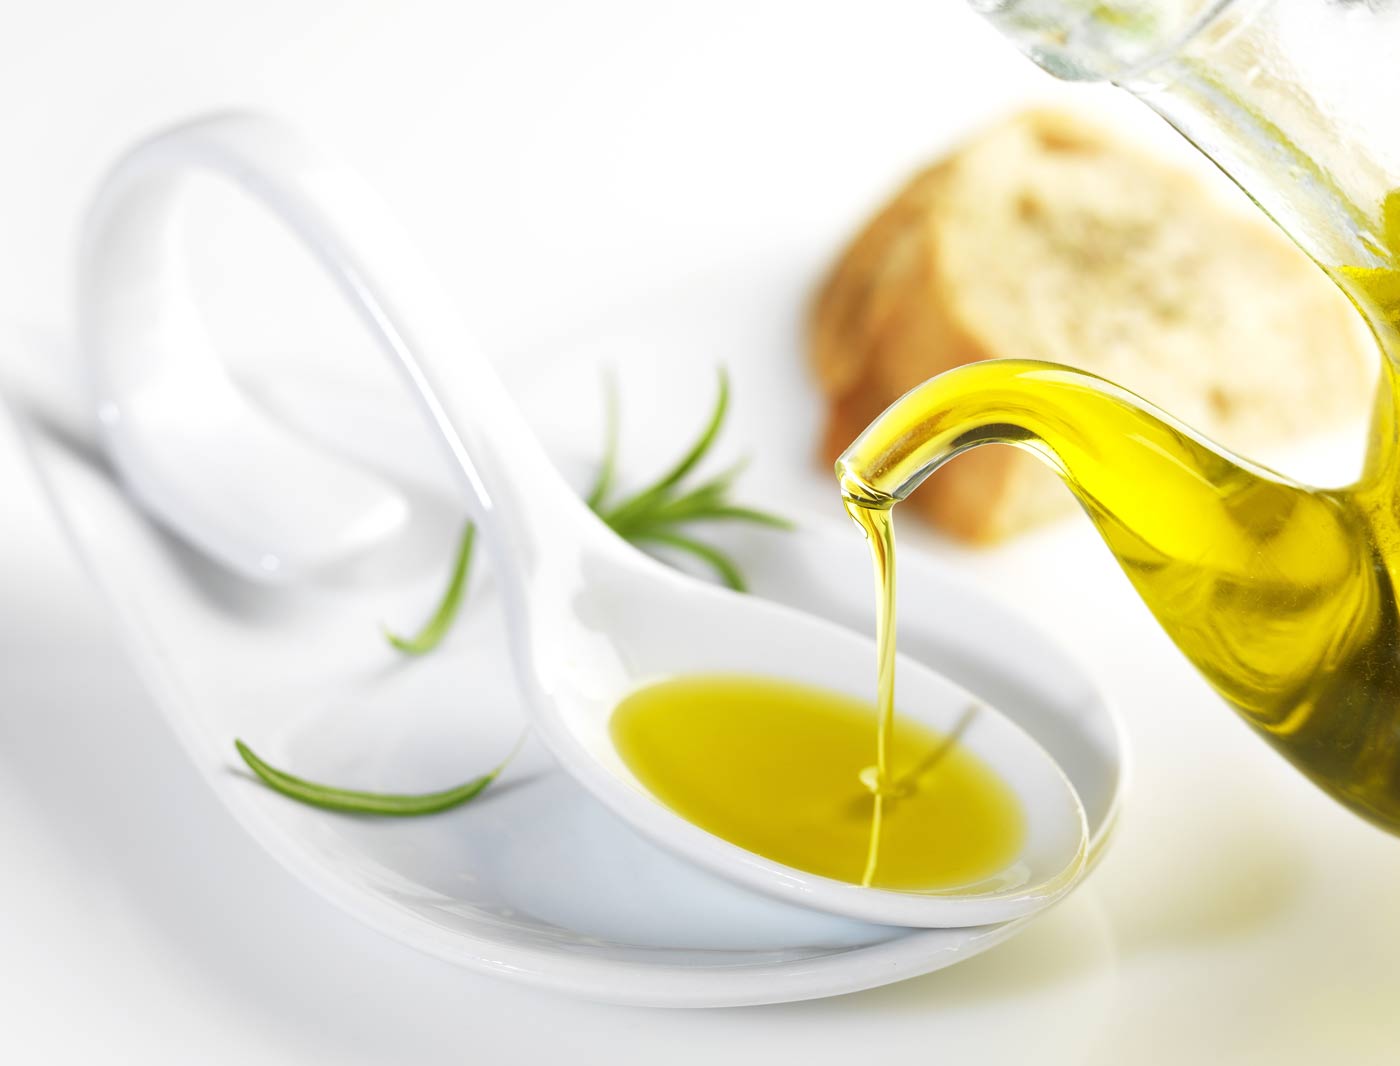 olive oil nutrition facts calories fat